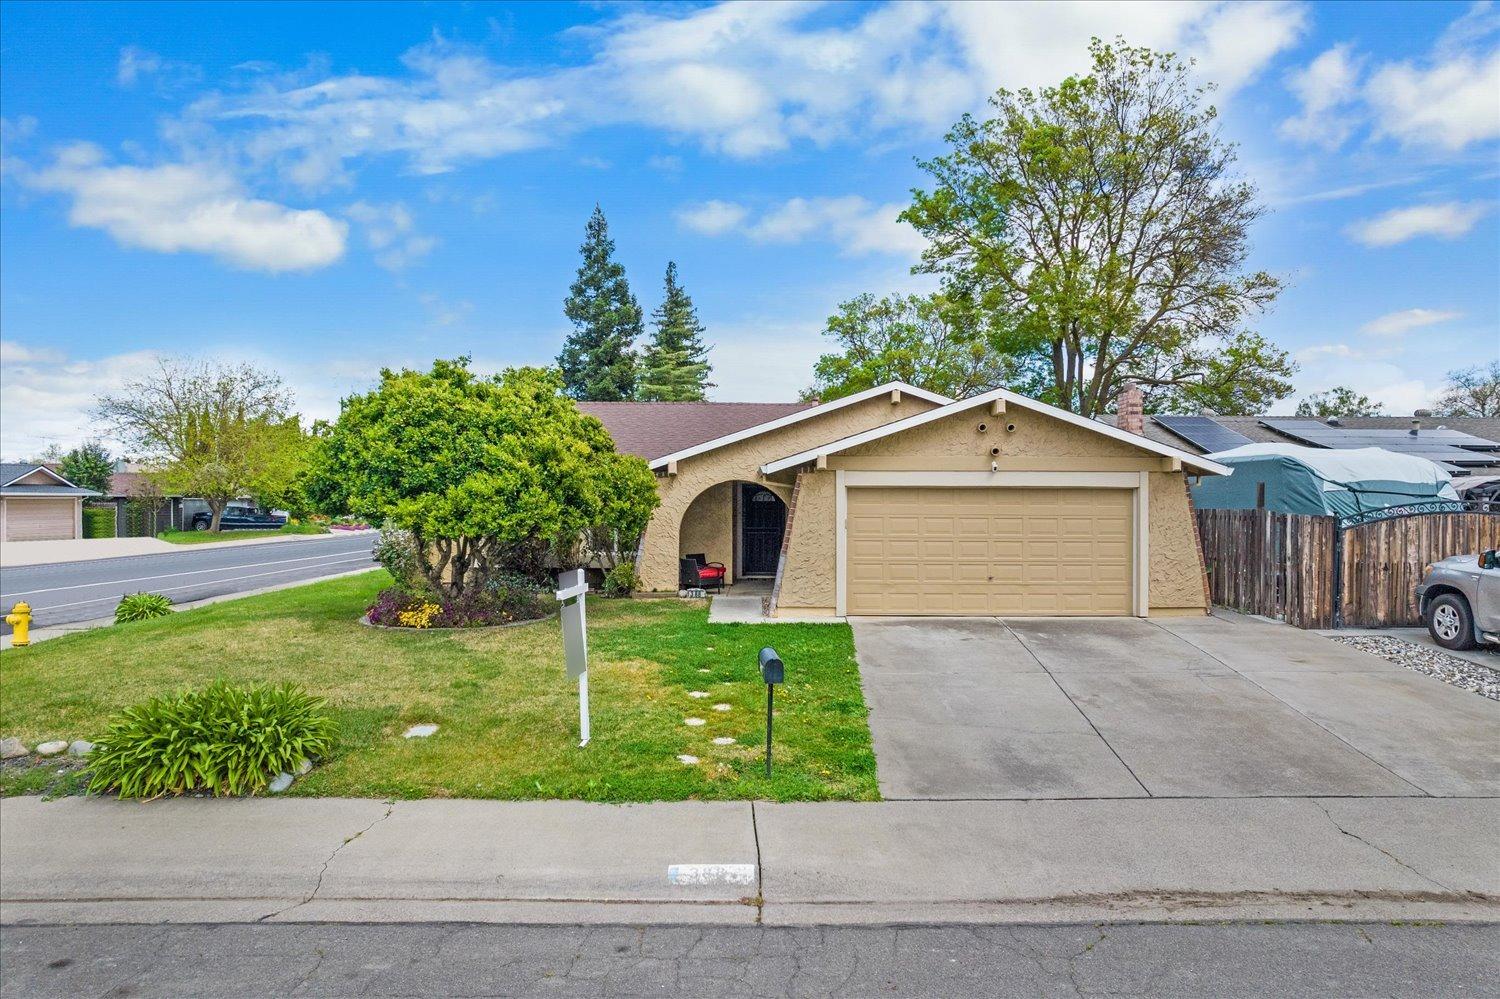 Photo of 388 Valleywood Dr in Woodland, CA